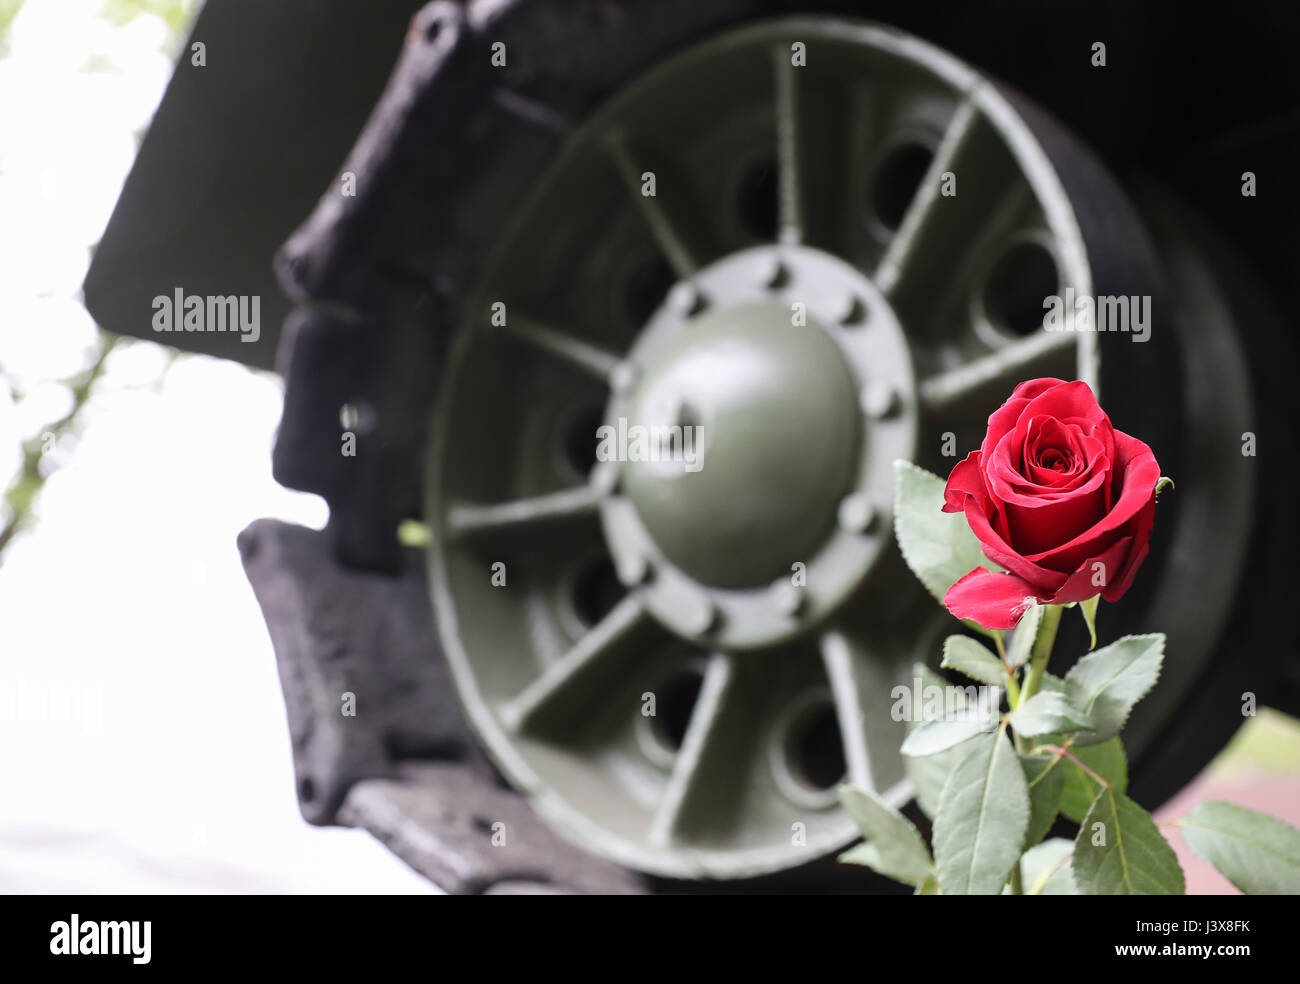 Berlin, Germany. 8th May, 2017. A rose is seen near a tank model during a series of memorial activities to commemorate the 72nd anniversary of the end of World World II in Europe, known as Victory in Europe Day at German-Russian Museum in Berlin, capital of Germany, on May 8, 2017. Credit: Shan Yuqi/Xinhua/Alamy Live News Stock Photo